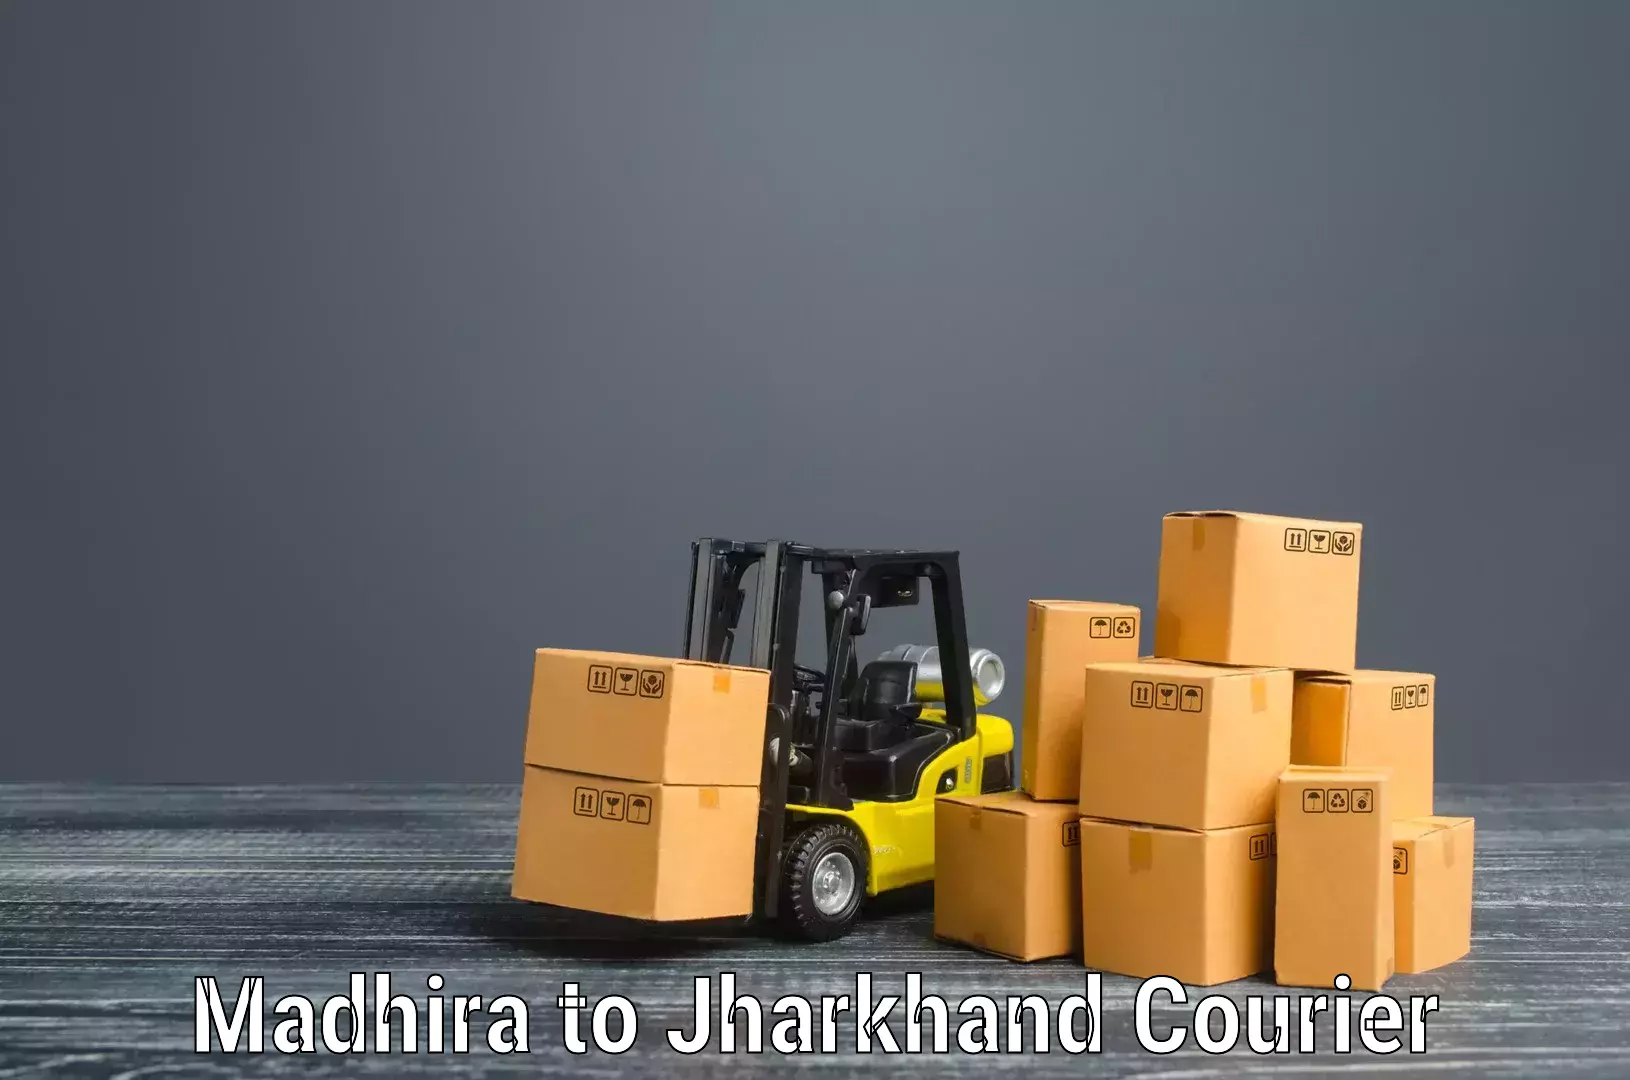 Professional packing services Madhira to Jamshedpur